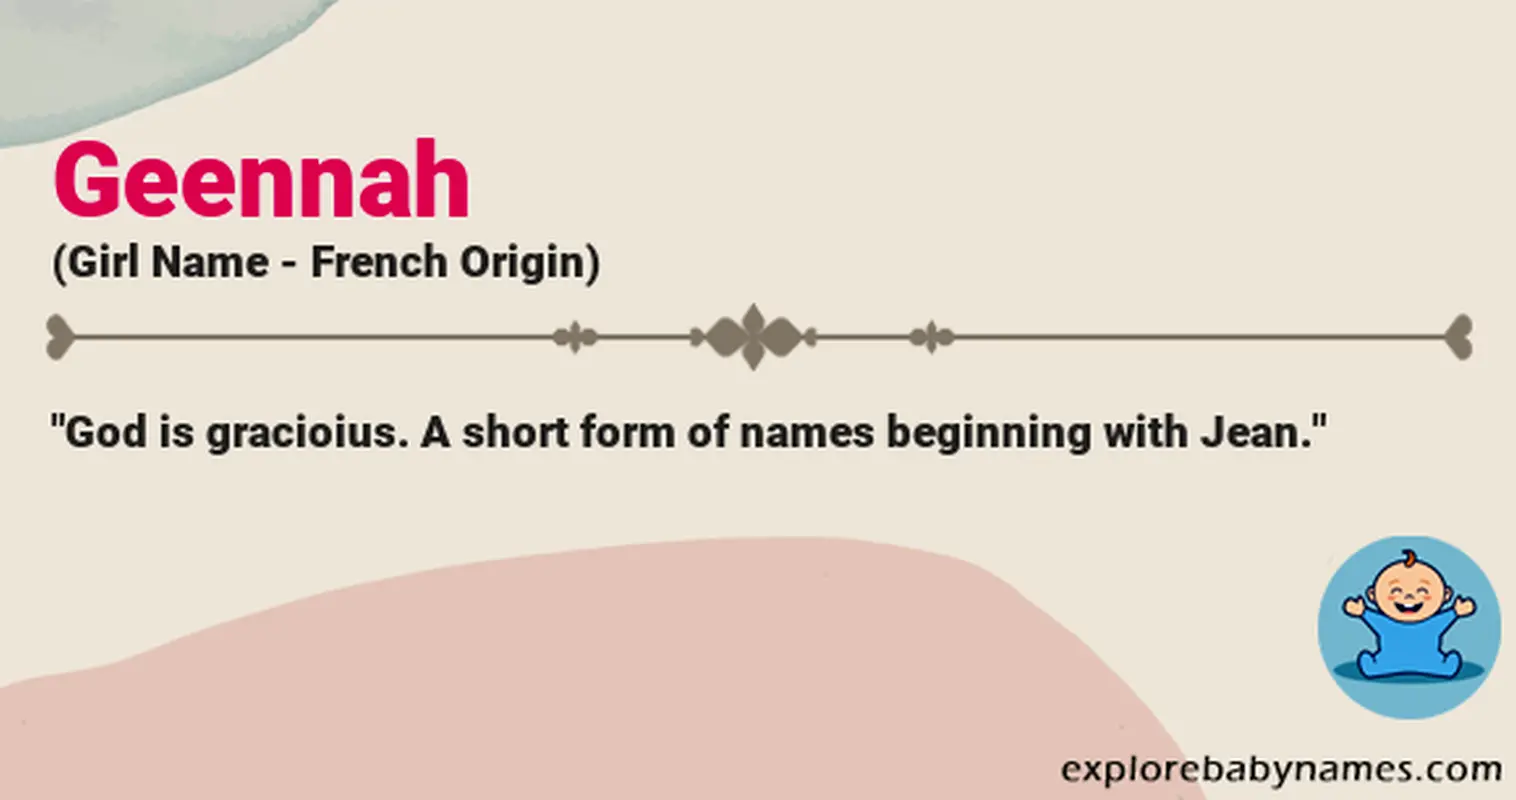 Meaning of Geennah